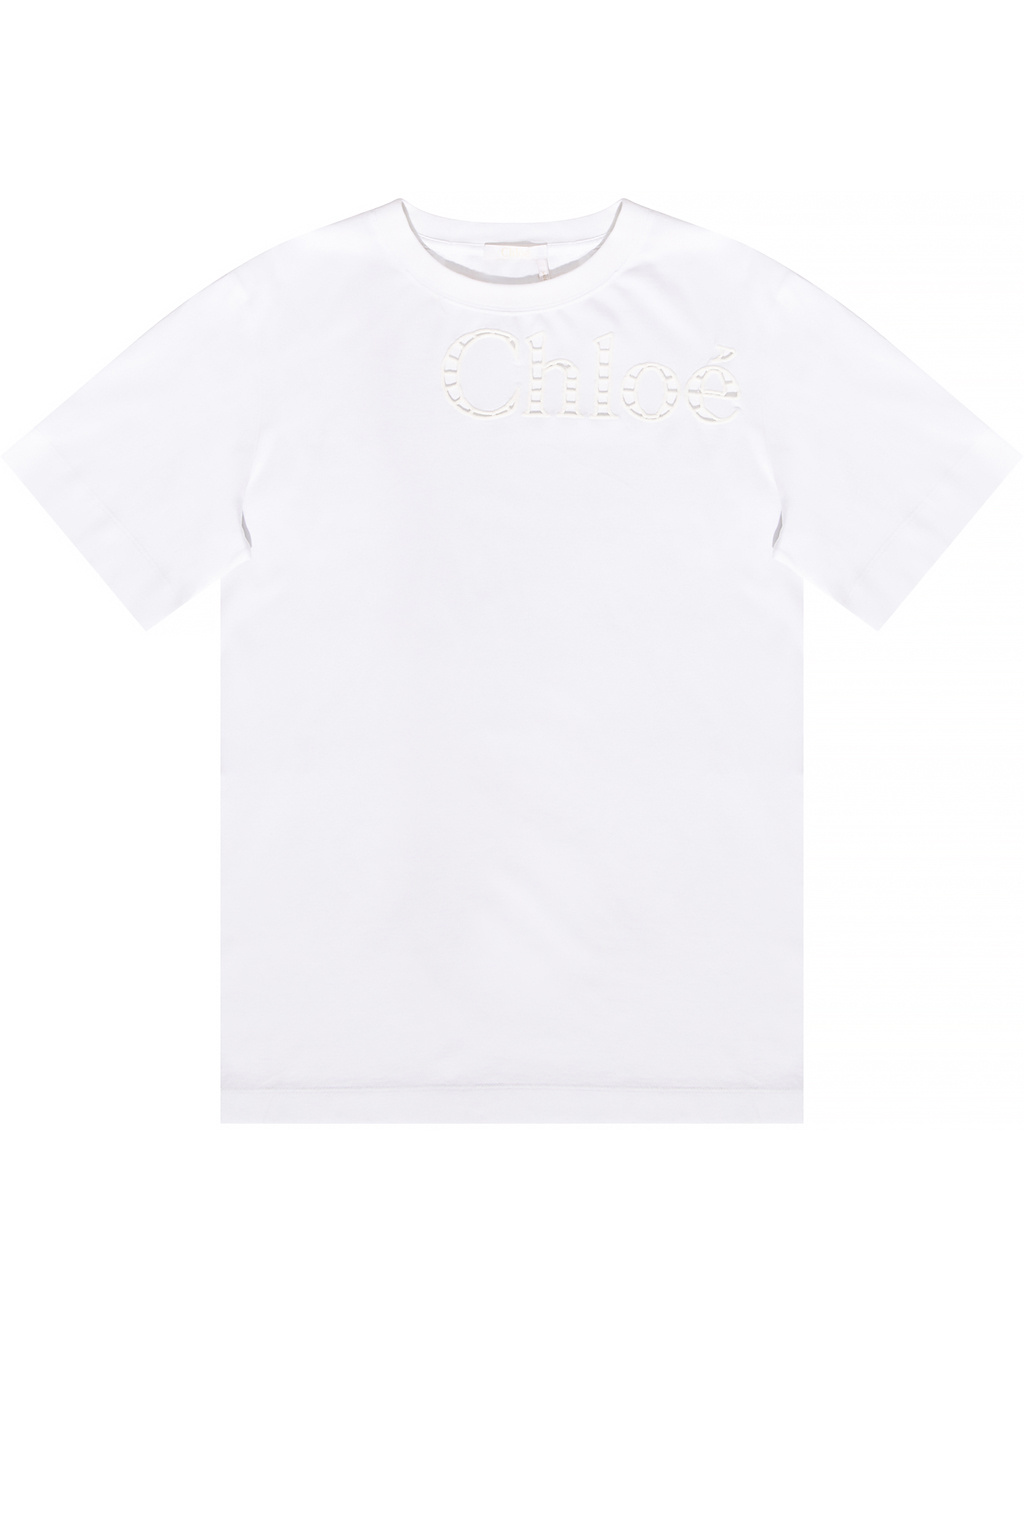 Chloé T-shirt with cut-out logo